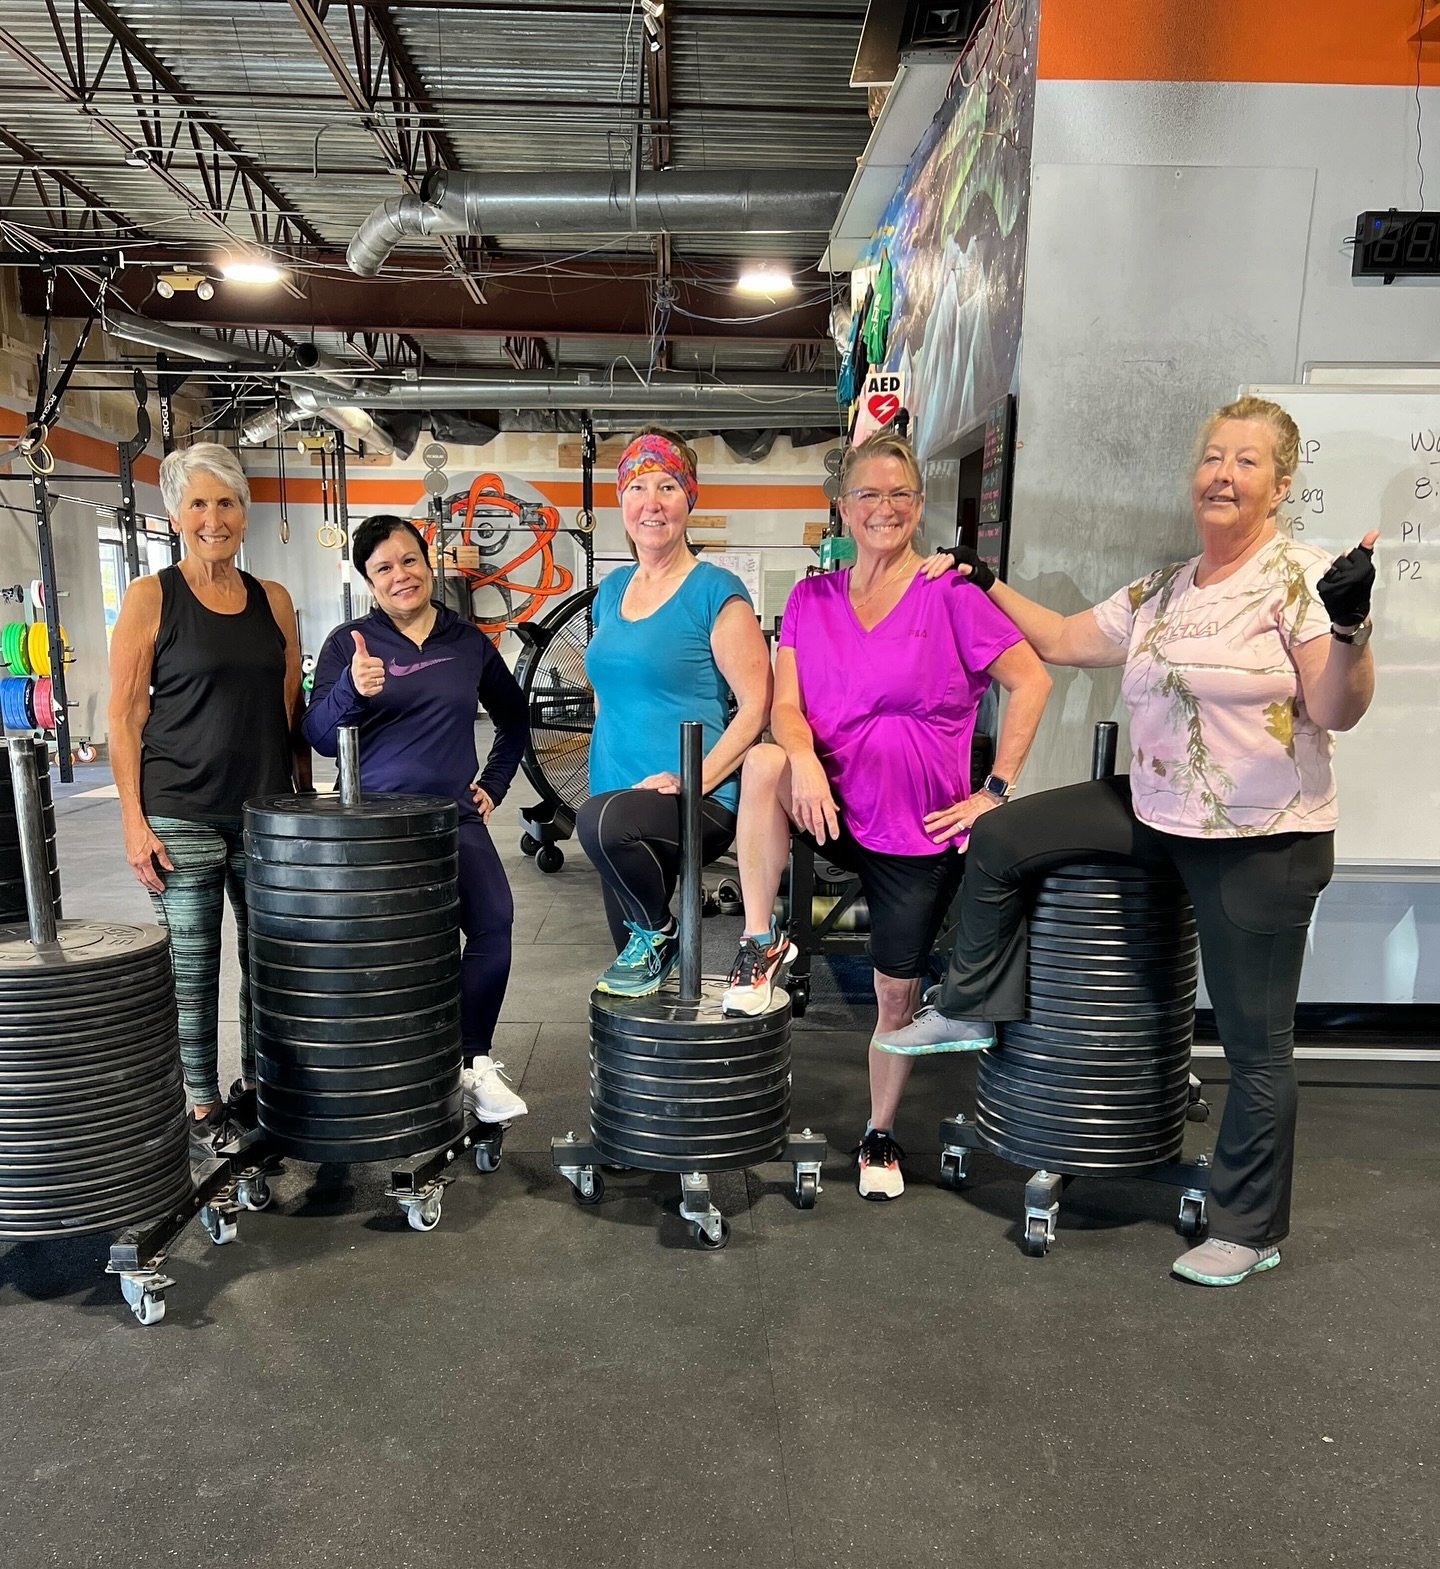 Our &ldquo;Legends&rdquo; 55+ crew is growing! Throw us a message to ask more about it. They meet MWF at 10:45am. They are making muscle, strength and functional movement GAINS! Let&rsquo;s go!